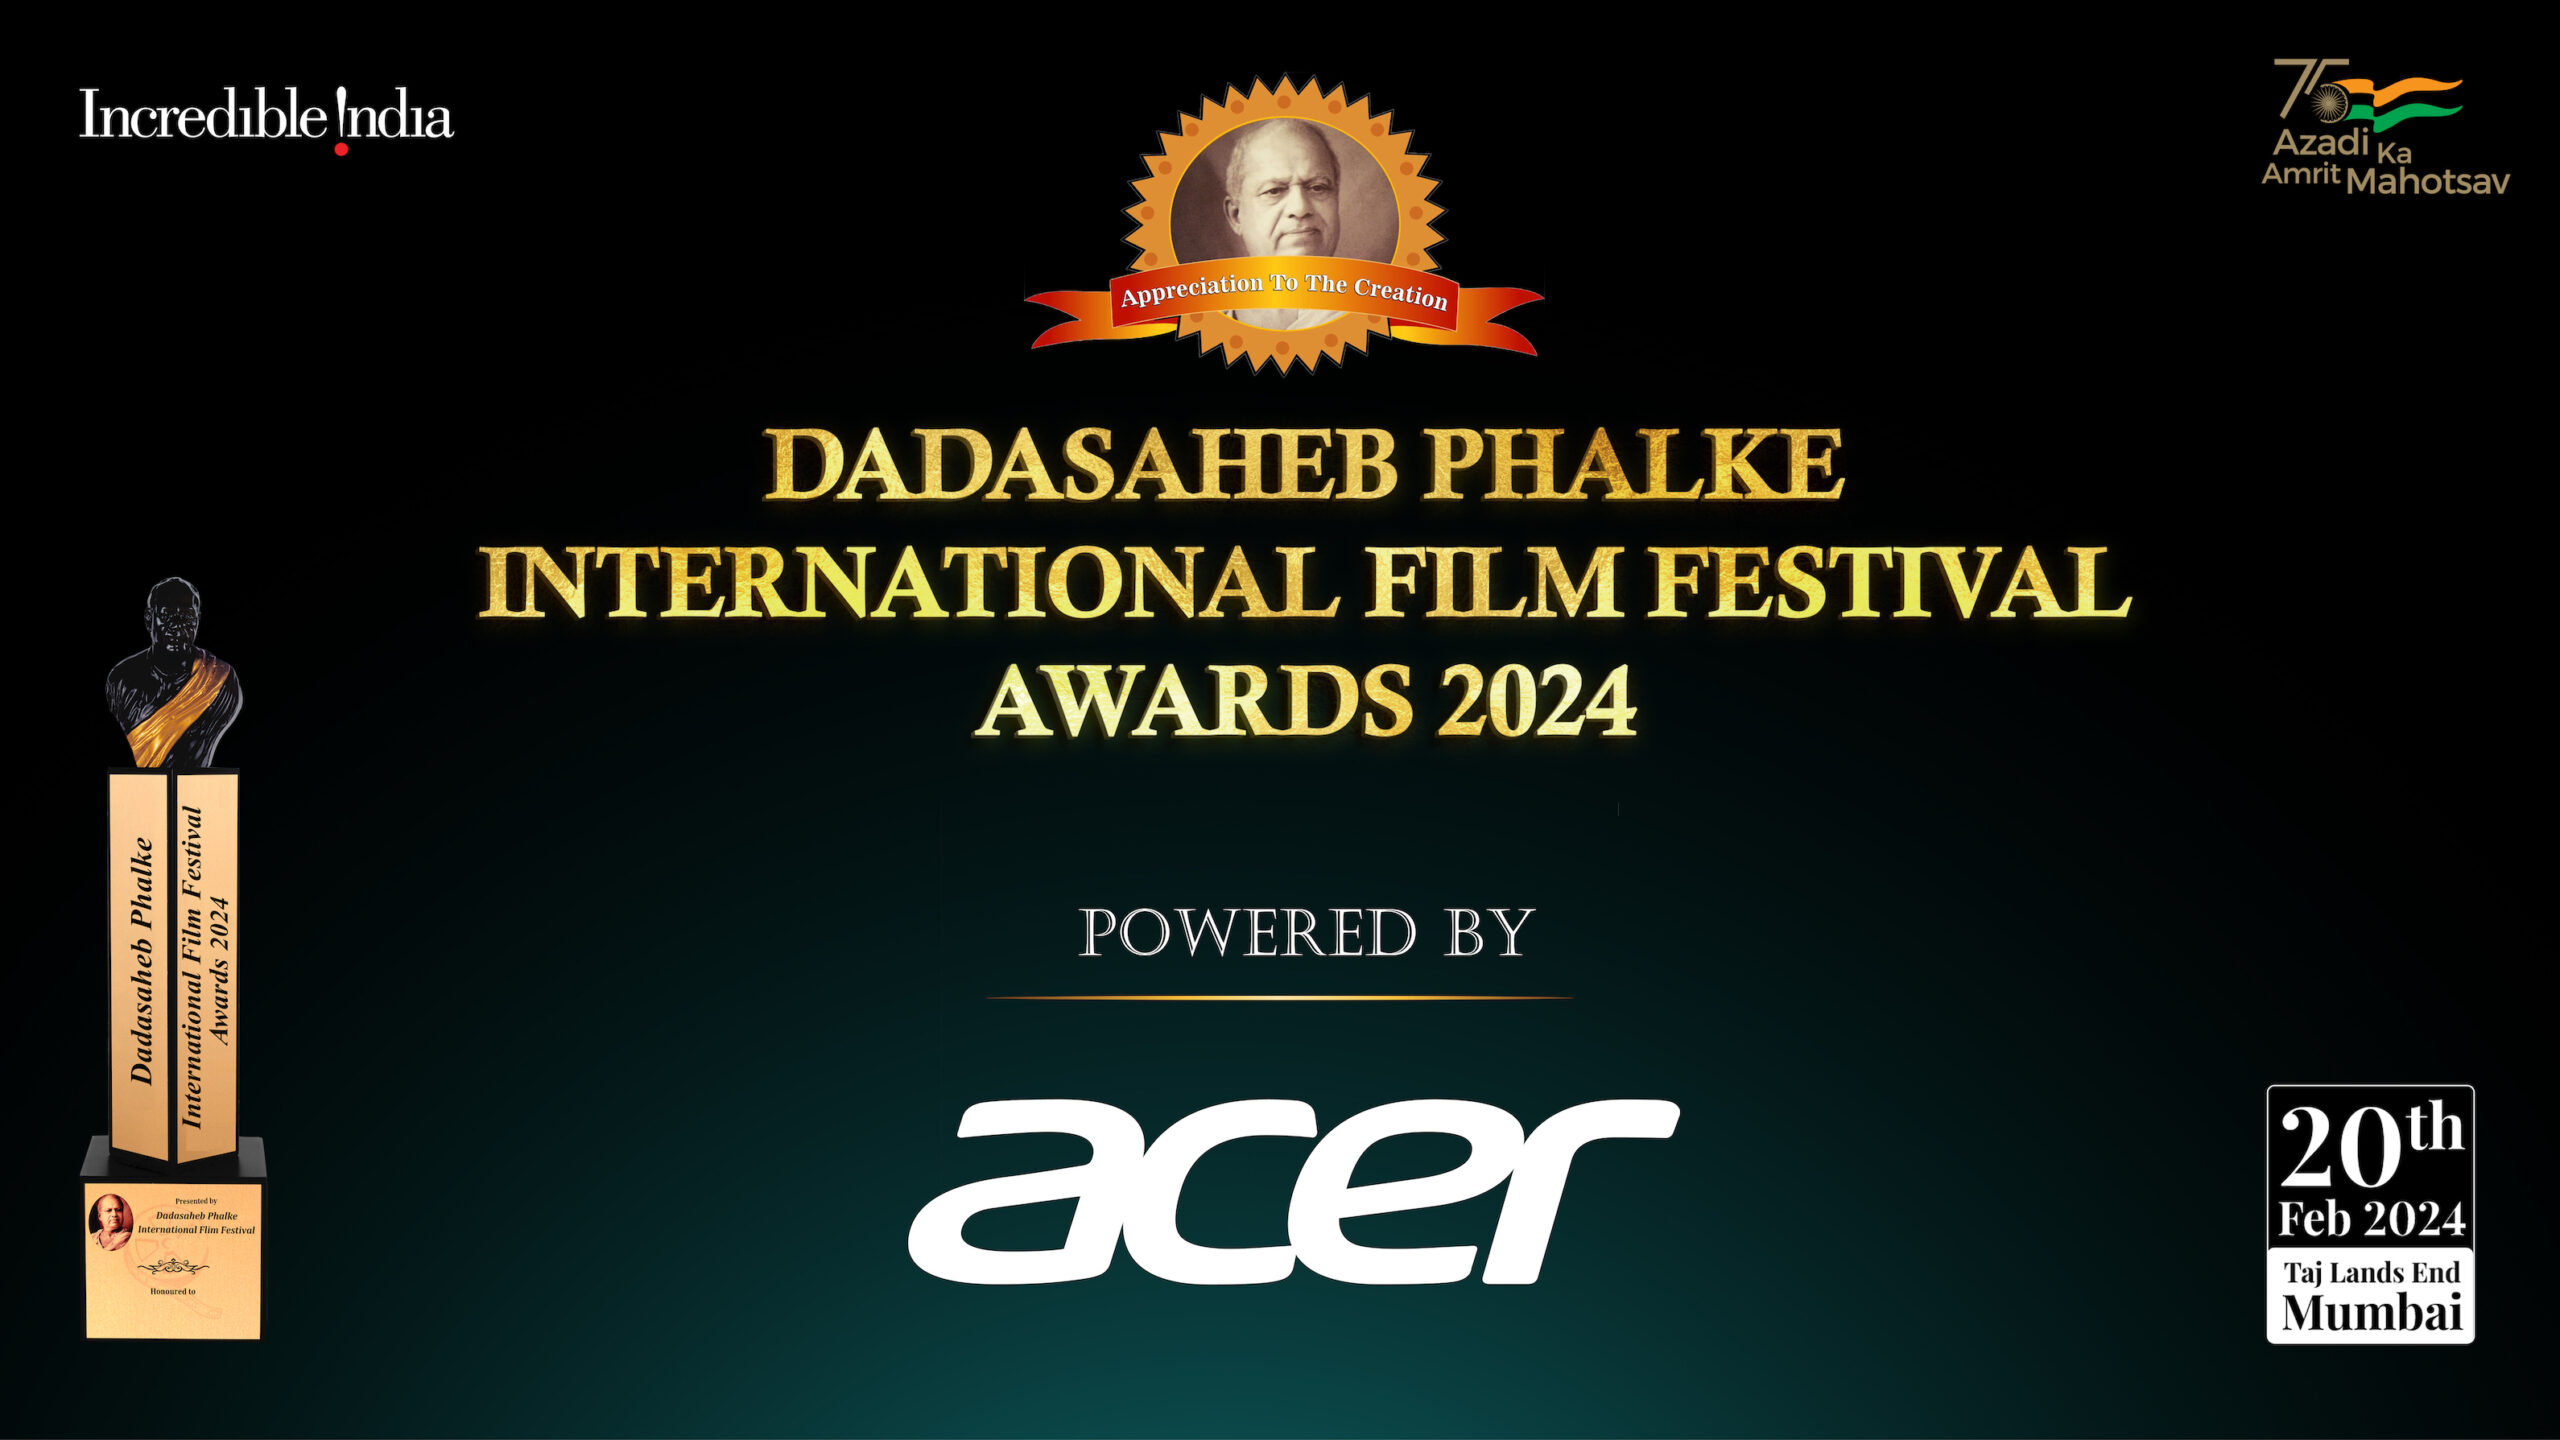 Acer replaces Mastercard as the official ‘Powered By Partner’ for the prestigious, Dadasaheb Phalke International Film Festival Awards 2024